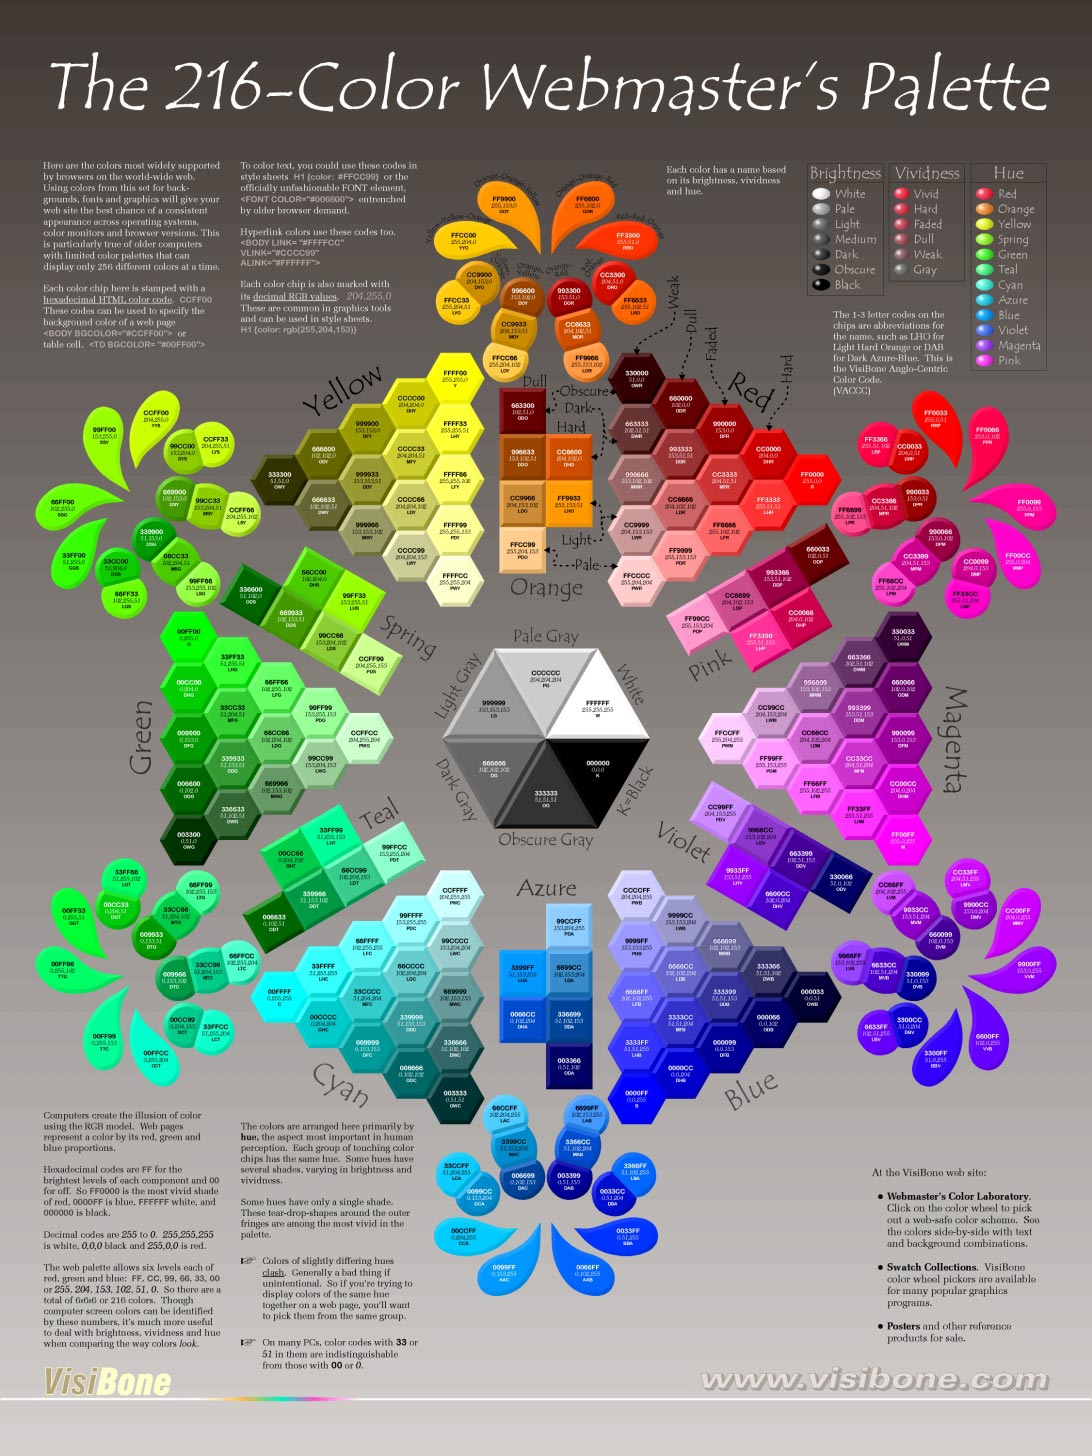 Poster of the 216-Color Webmaster’s Palette with RGB values